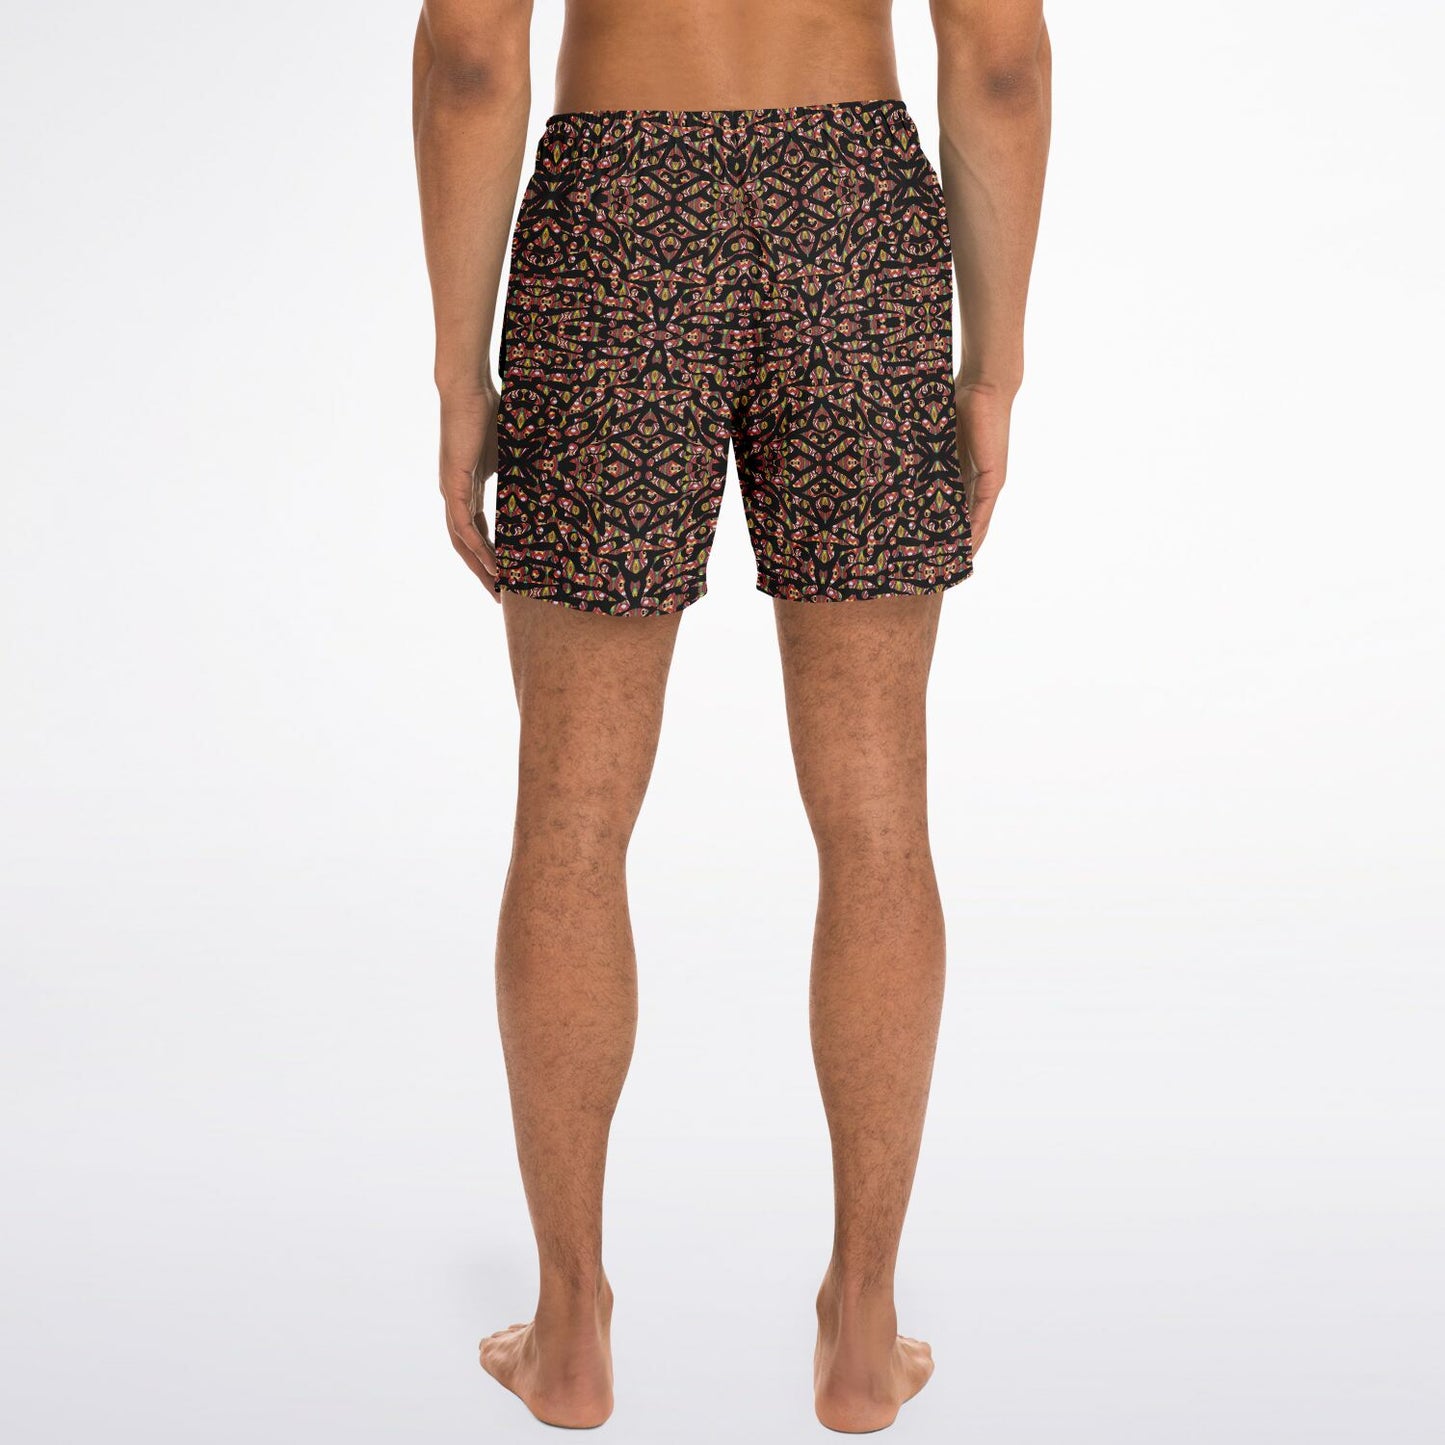 Black swimming trunks for men. Shorts style with a fun pattern printed